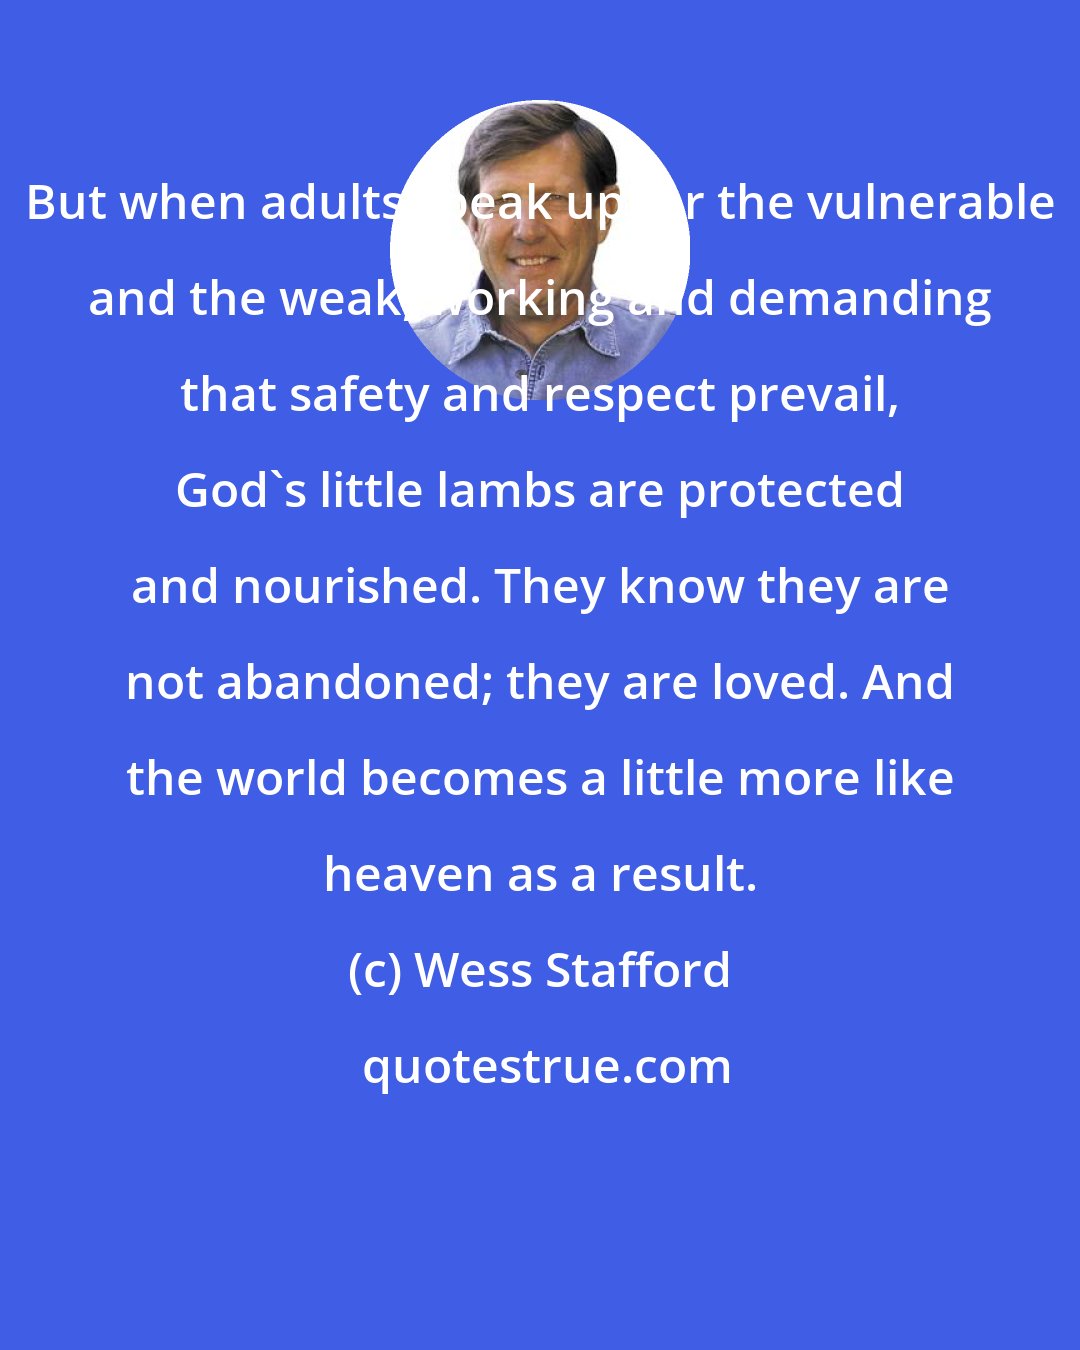 Wess Stafford: But when adults speak up for the vulnerable and the weak, working and demanding that safety and respect prevail, God's little lambs are protected and nourished. They know they are not abandoned; they are loved. And the world becomes a little more like heaven as a result.